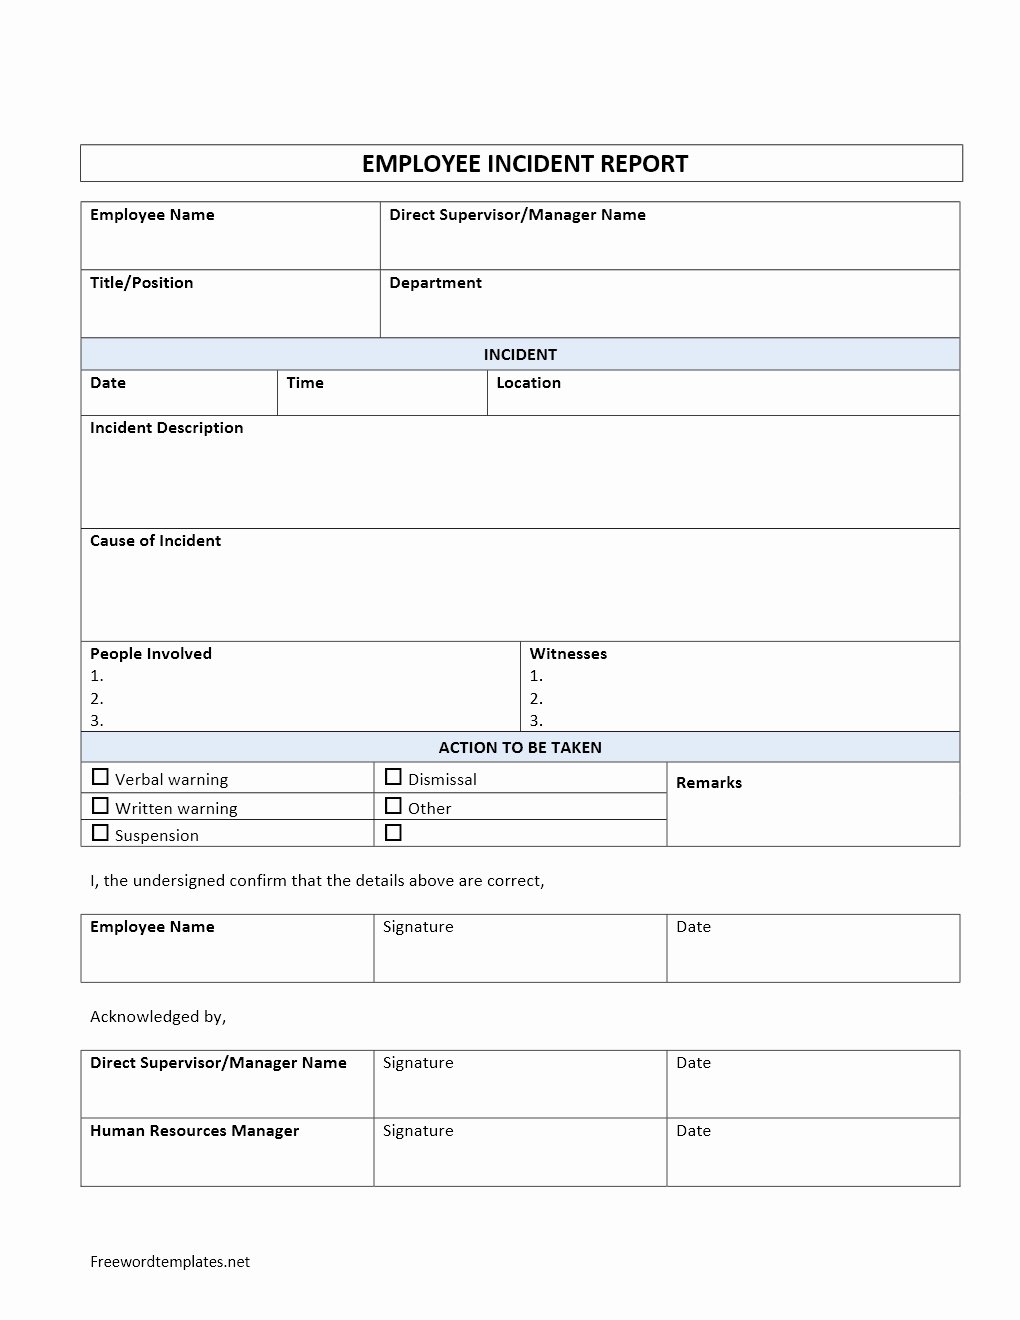 Workplace Incident Report form Template Free Inspirational Employee Incident Report